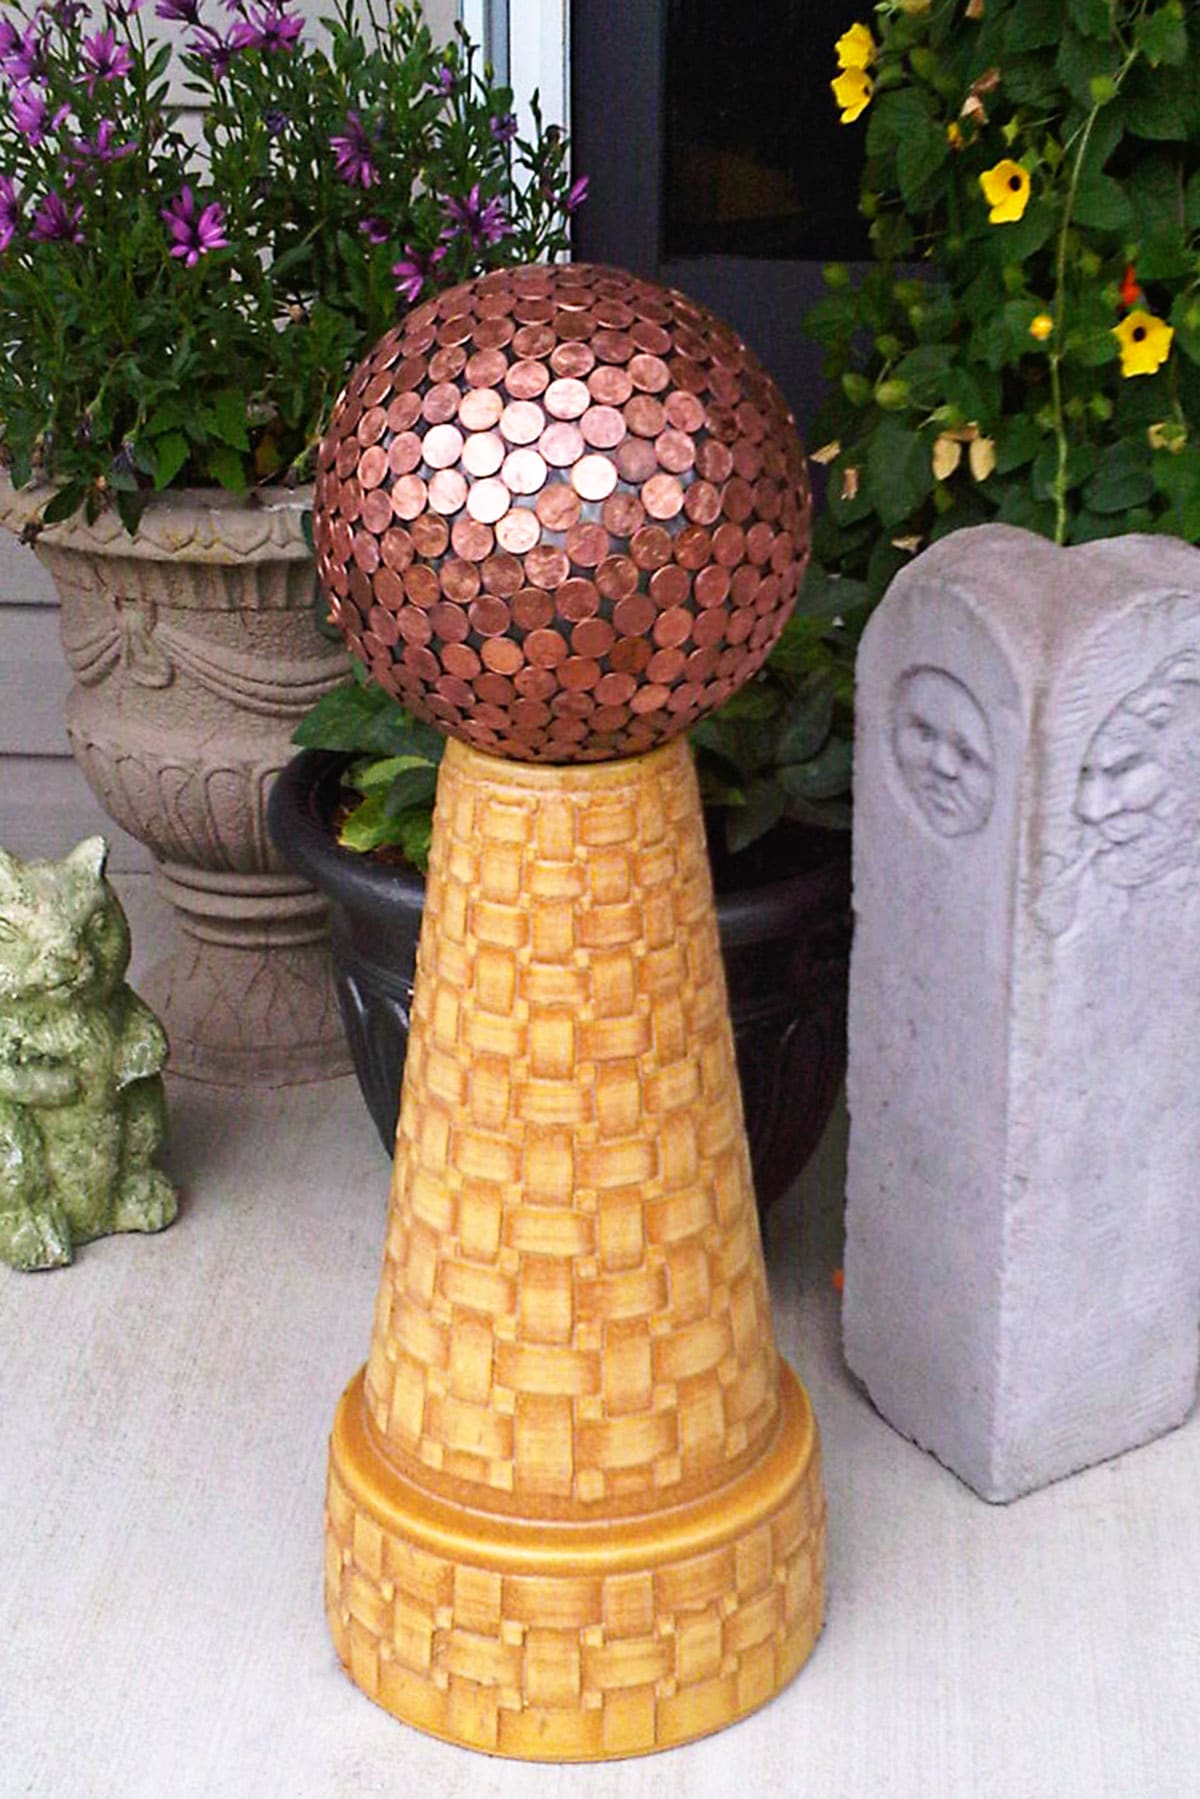 Bowling ball covered in pennies and used as garden art.